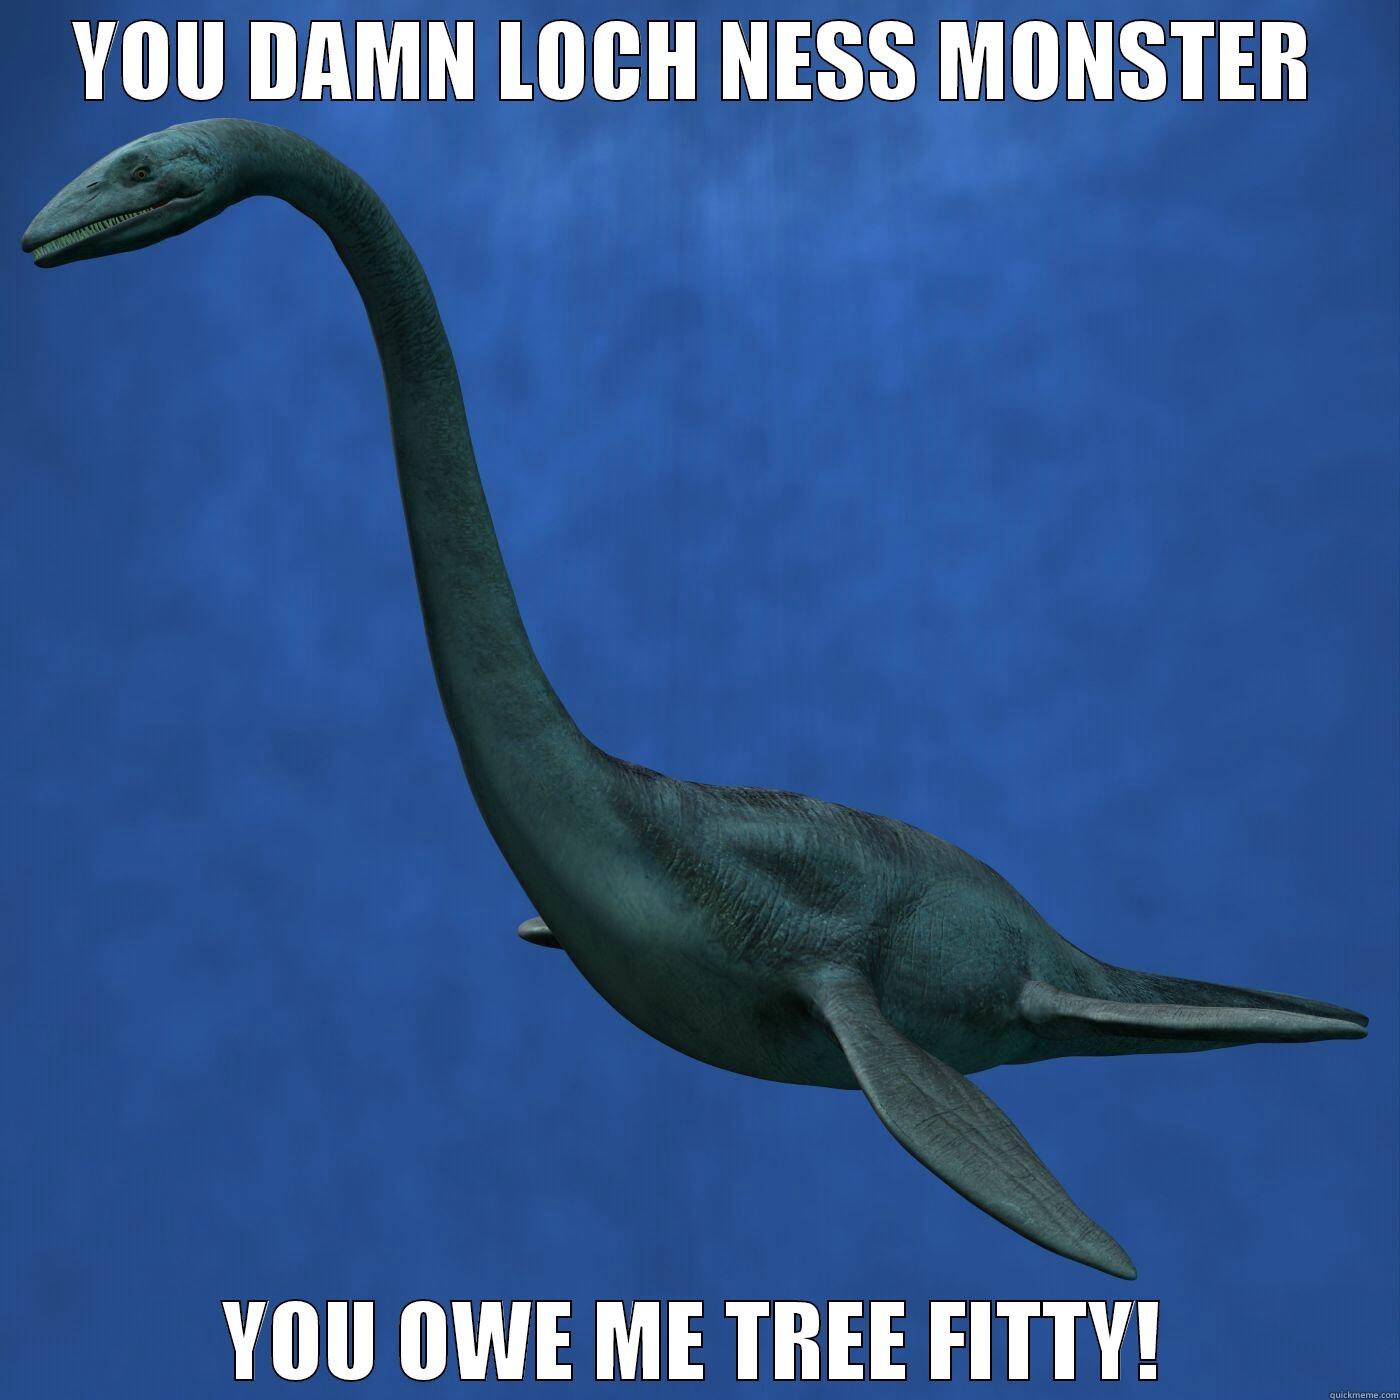 loch ness - YOU DAMN LOCH NESS MONSTER YOU OWE ME TREE FITTY! Misc